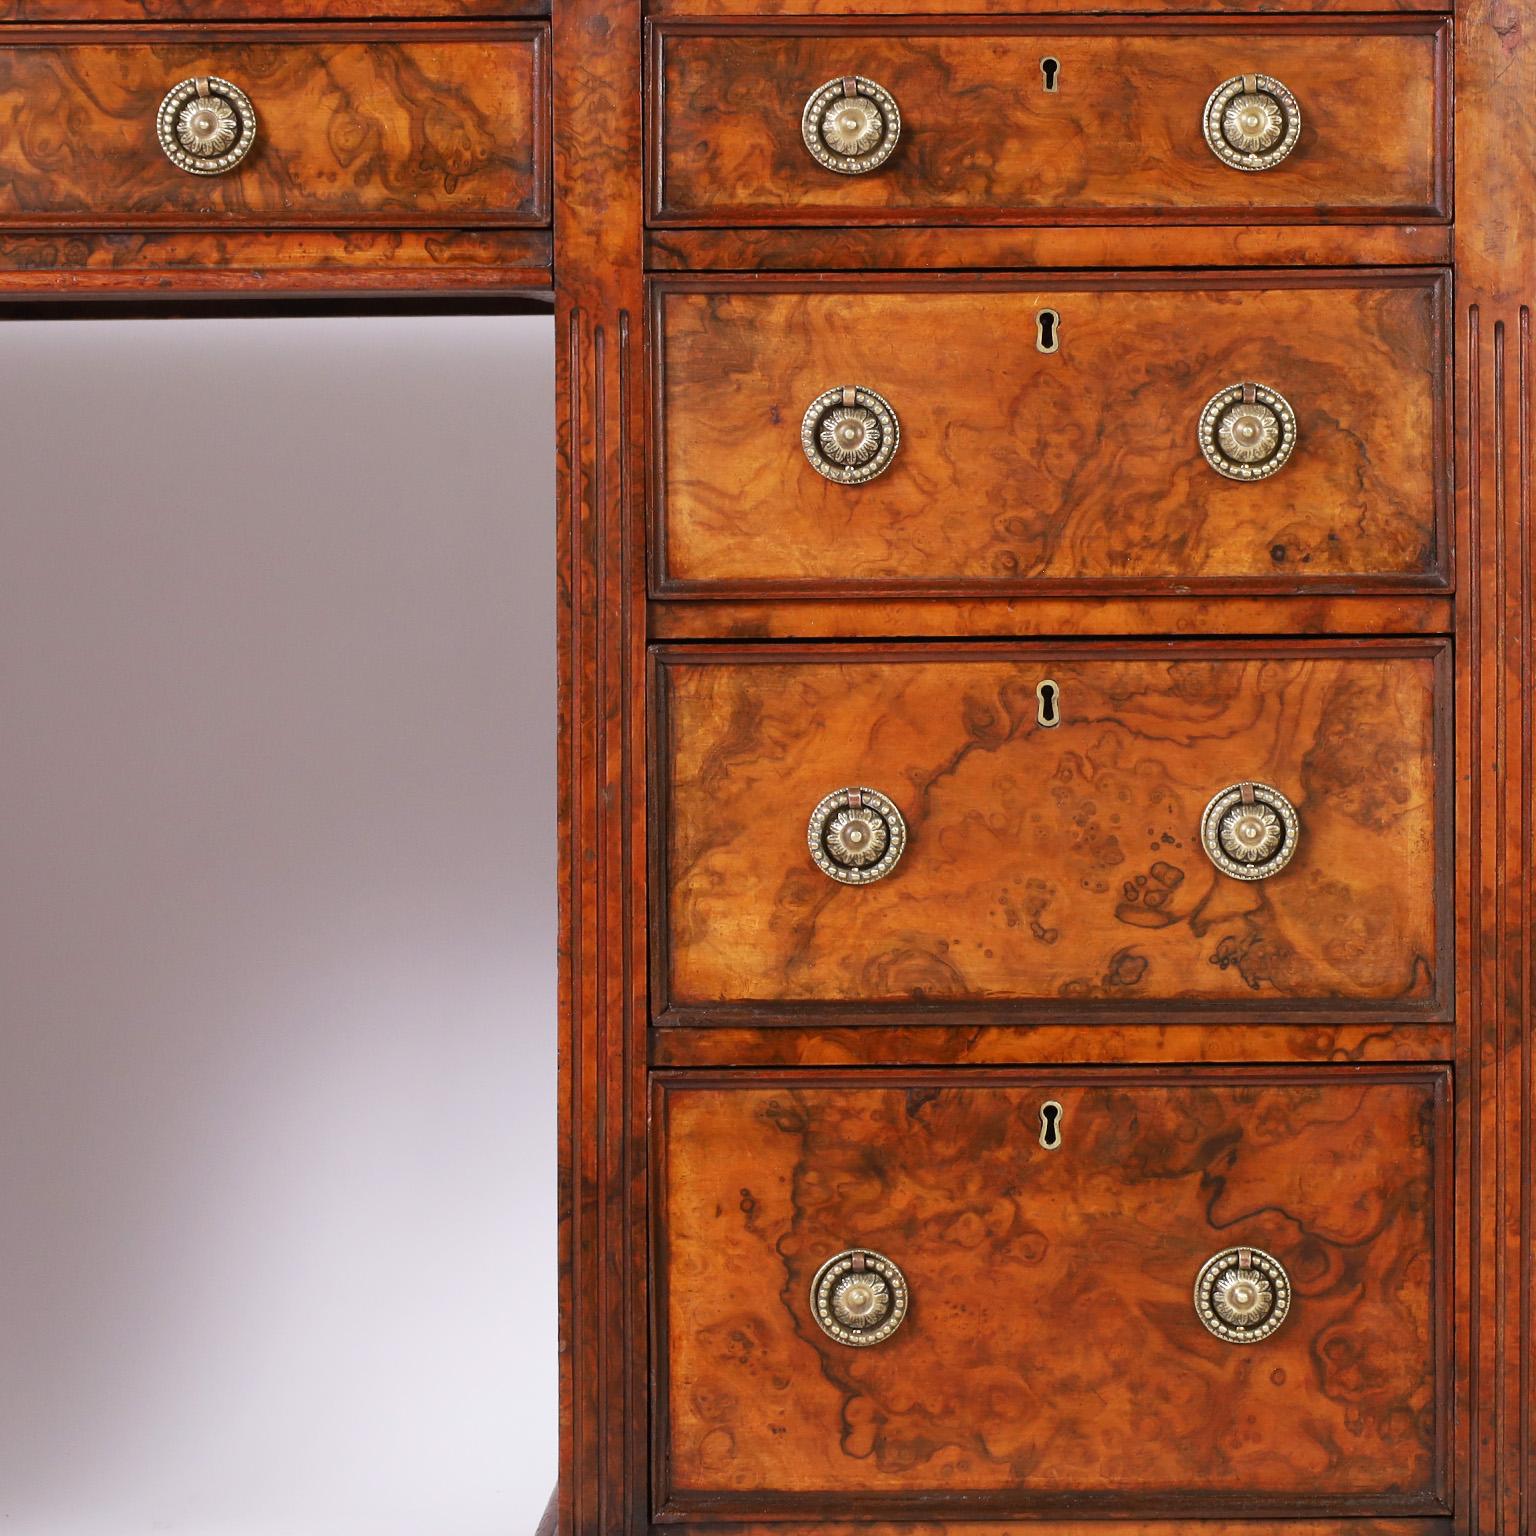 19th Century Antique English Leather Top Desk For Sale